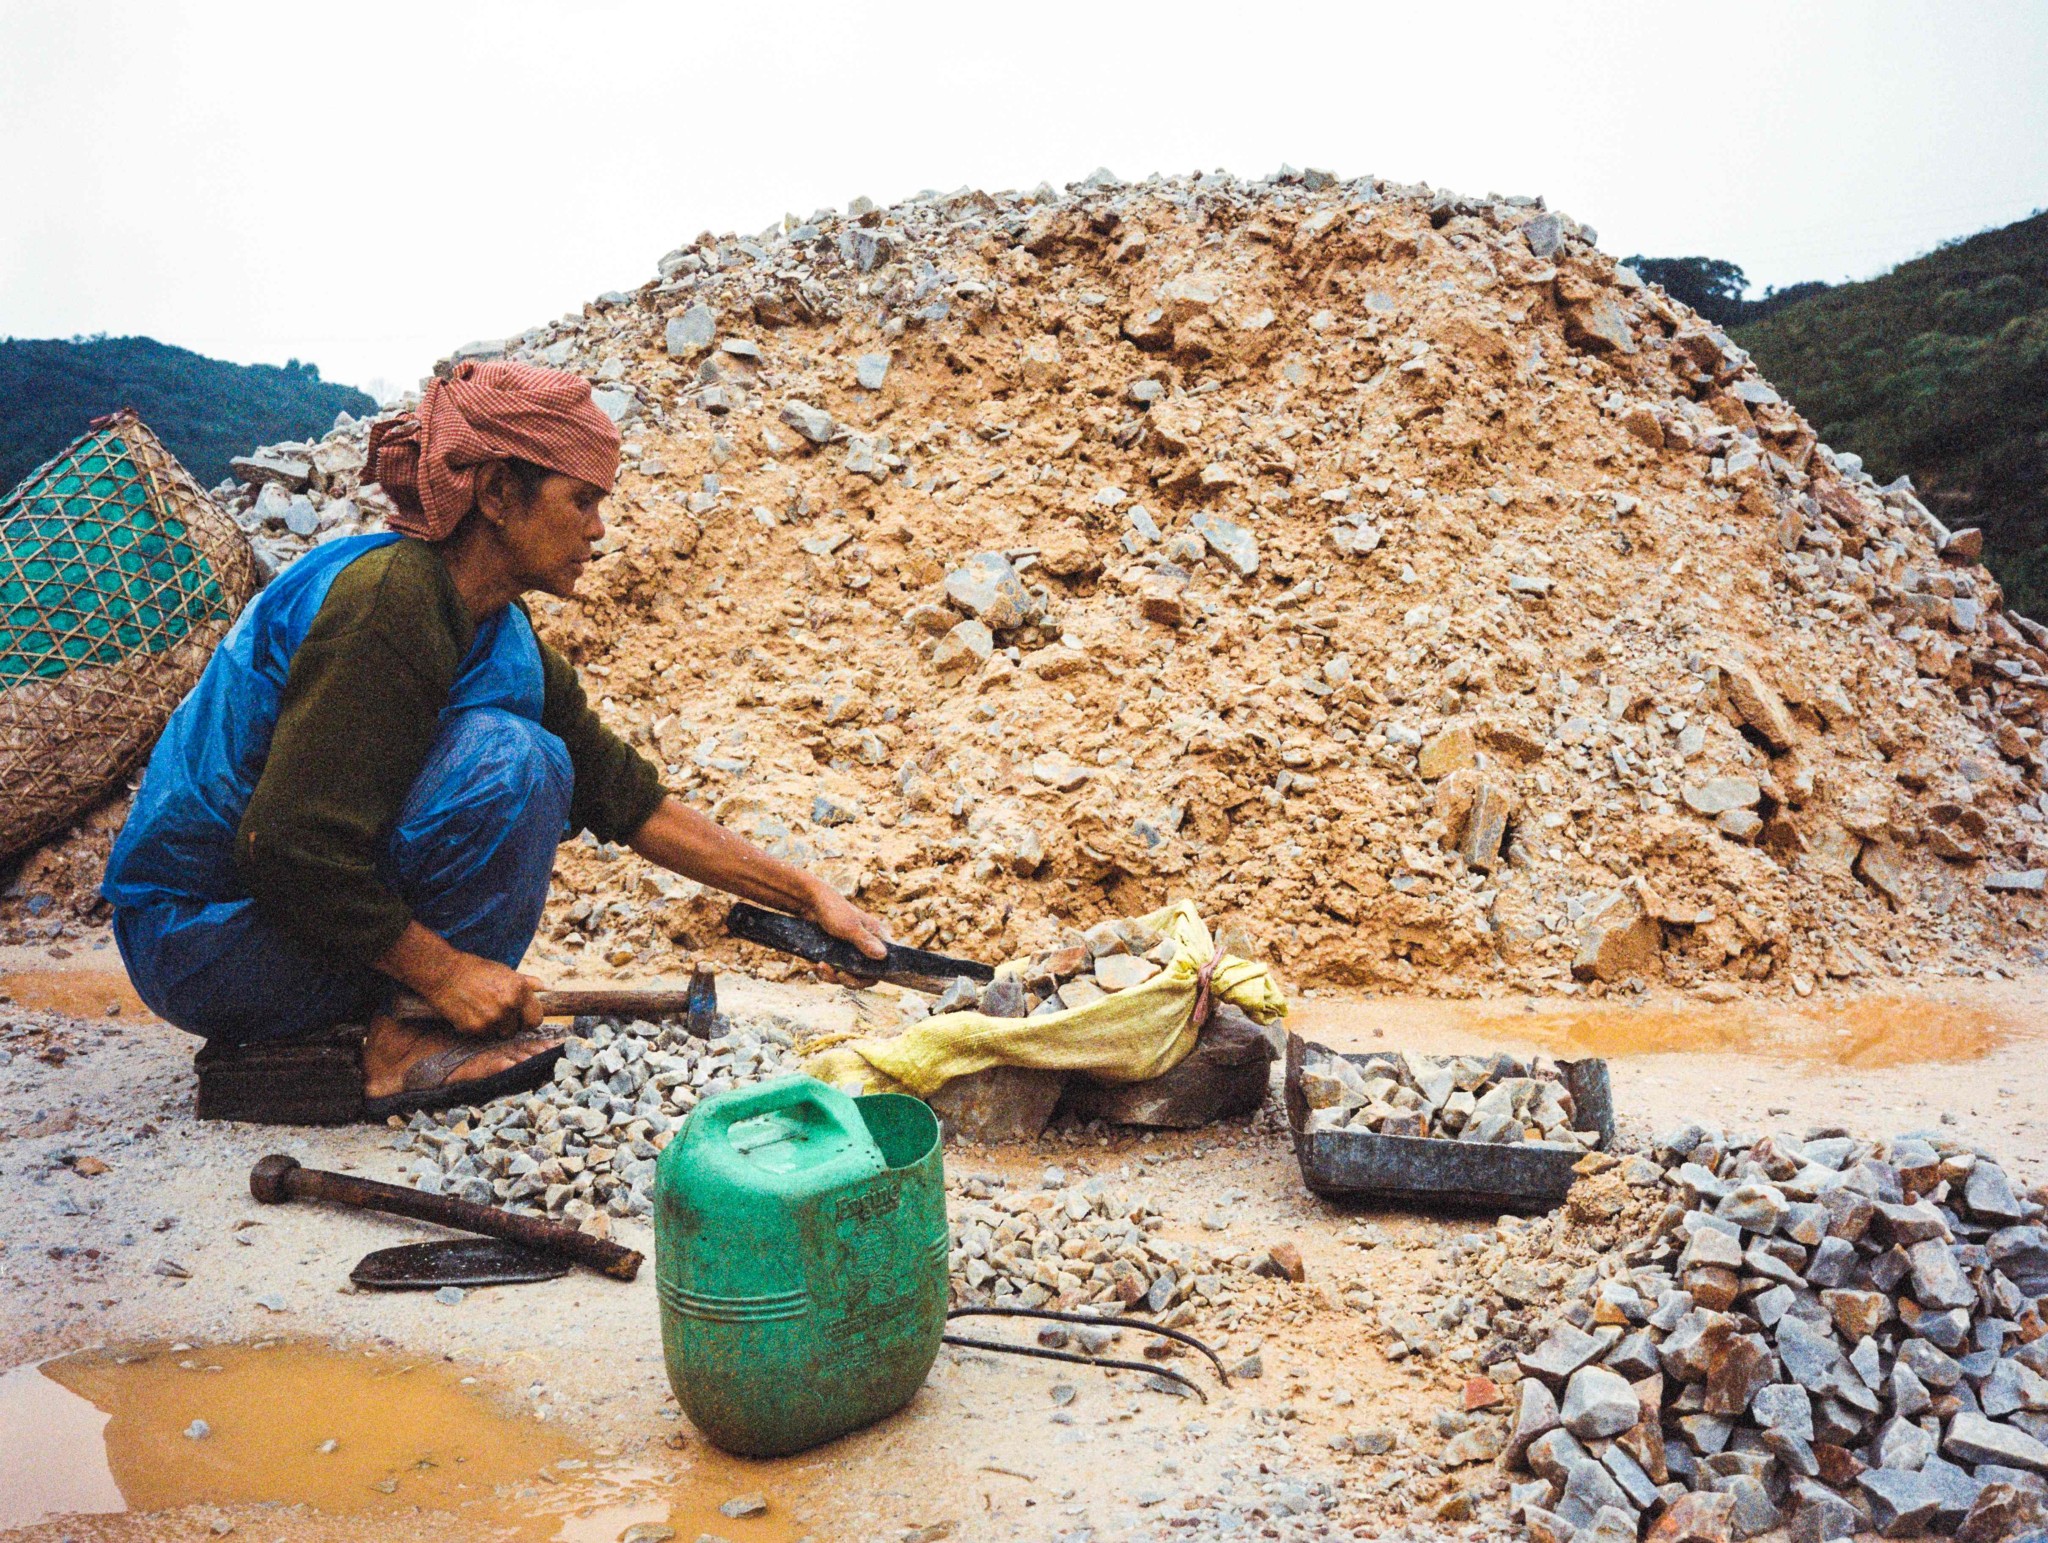 For this back-breaking work - 12 hours a day, 6 days a week - the 'nong shain maw' are paid around $2 a day.